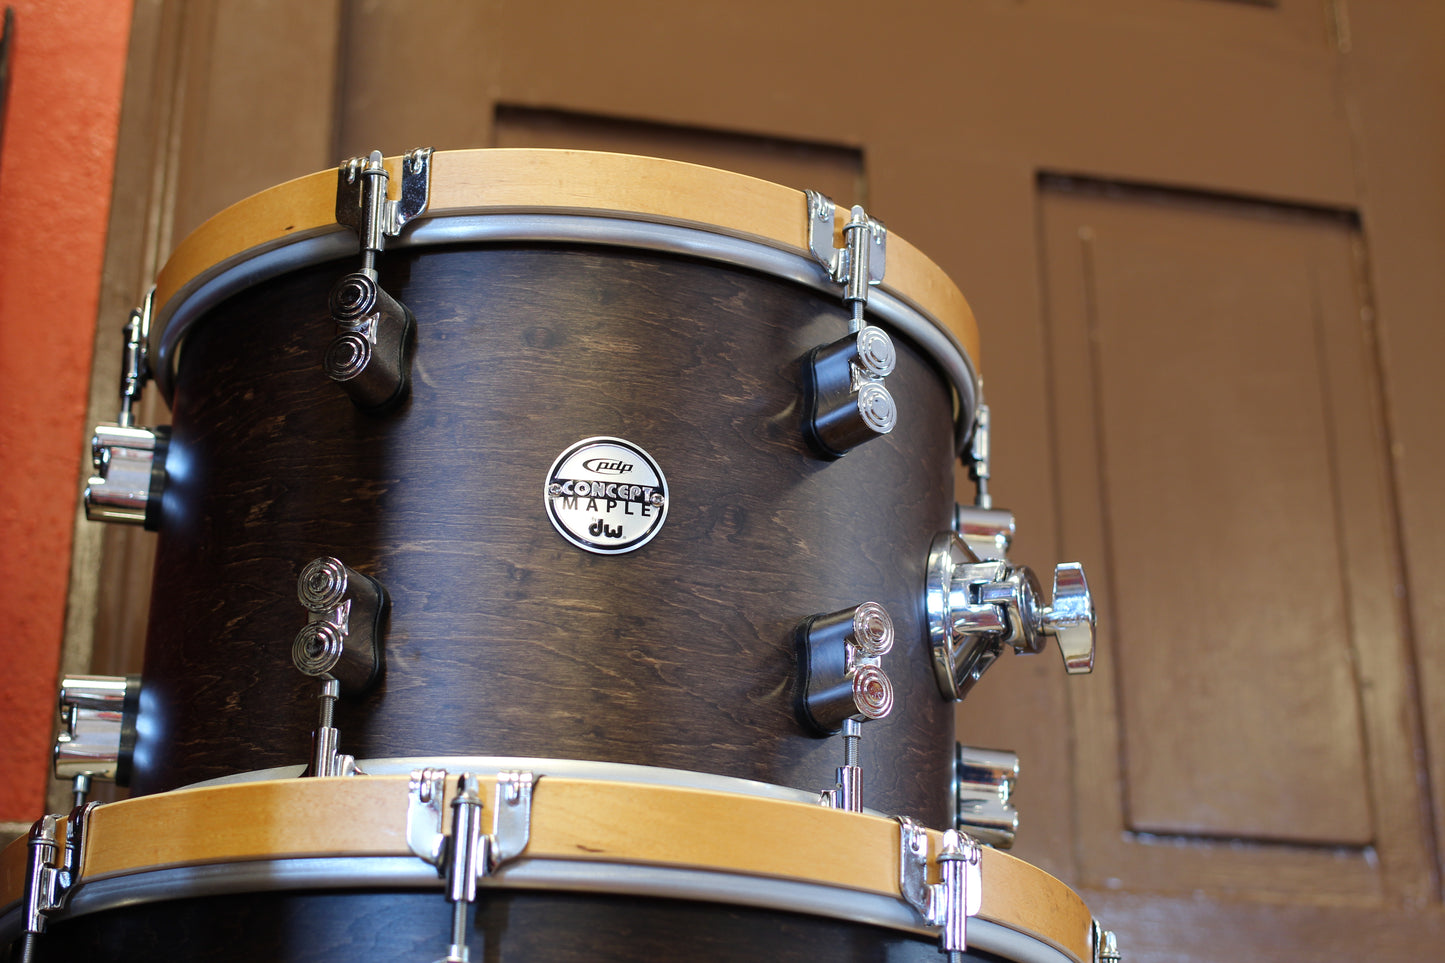 Used PDP Classic Concept Maple in Satin Walnut 16x22 16x16 9x13